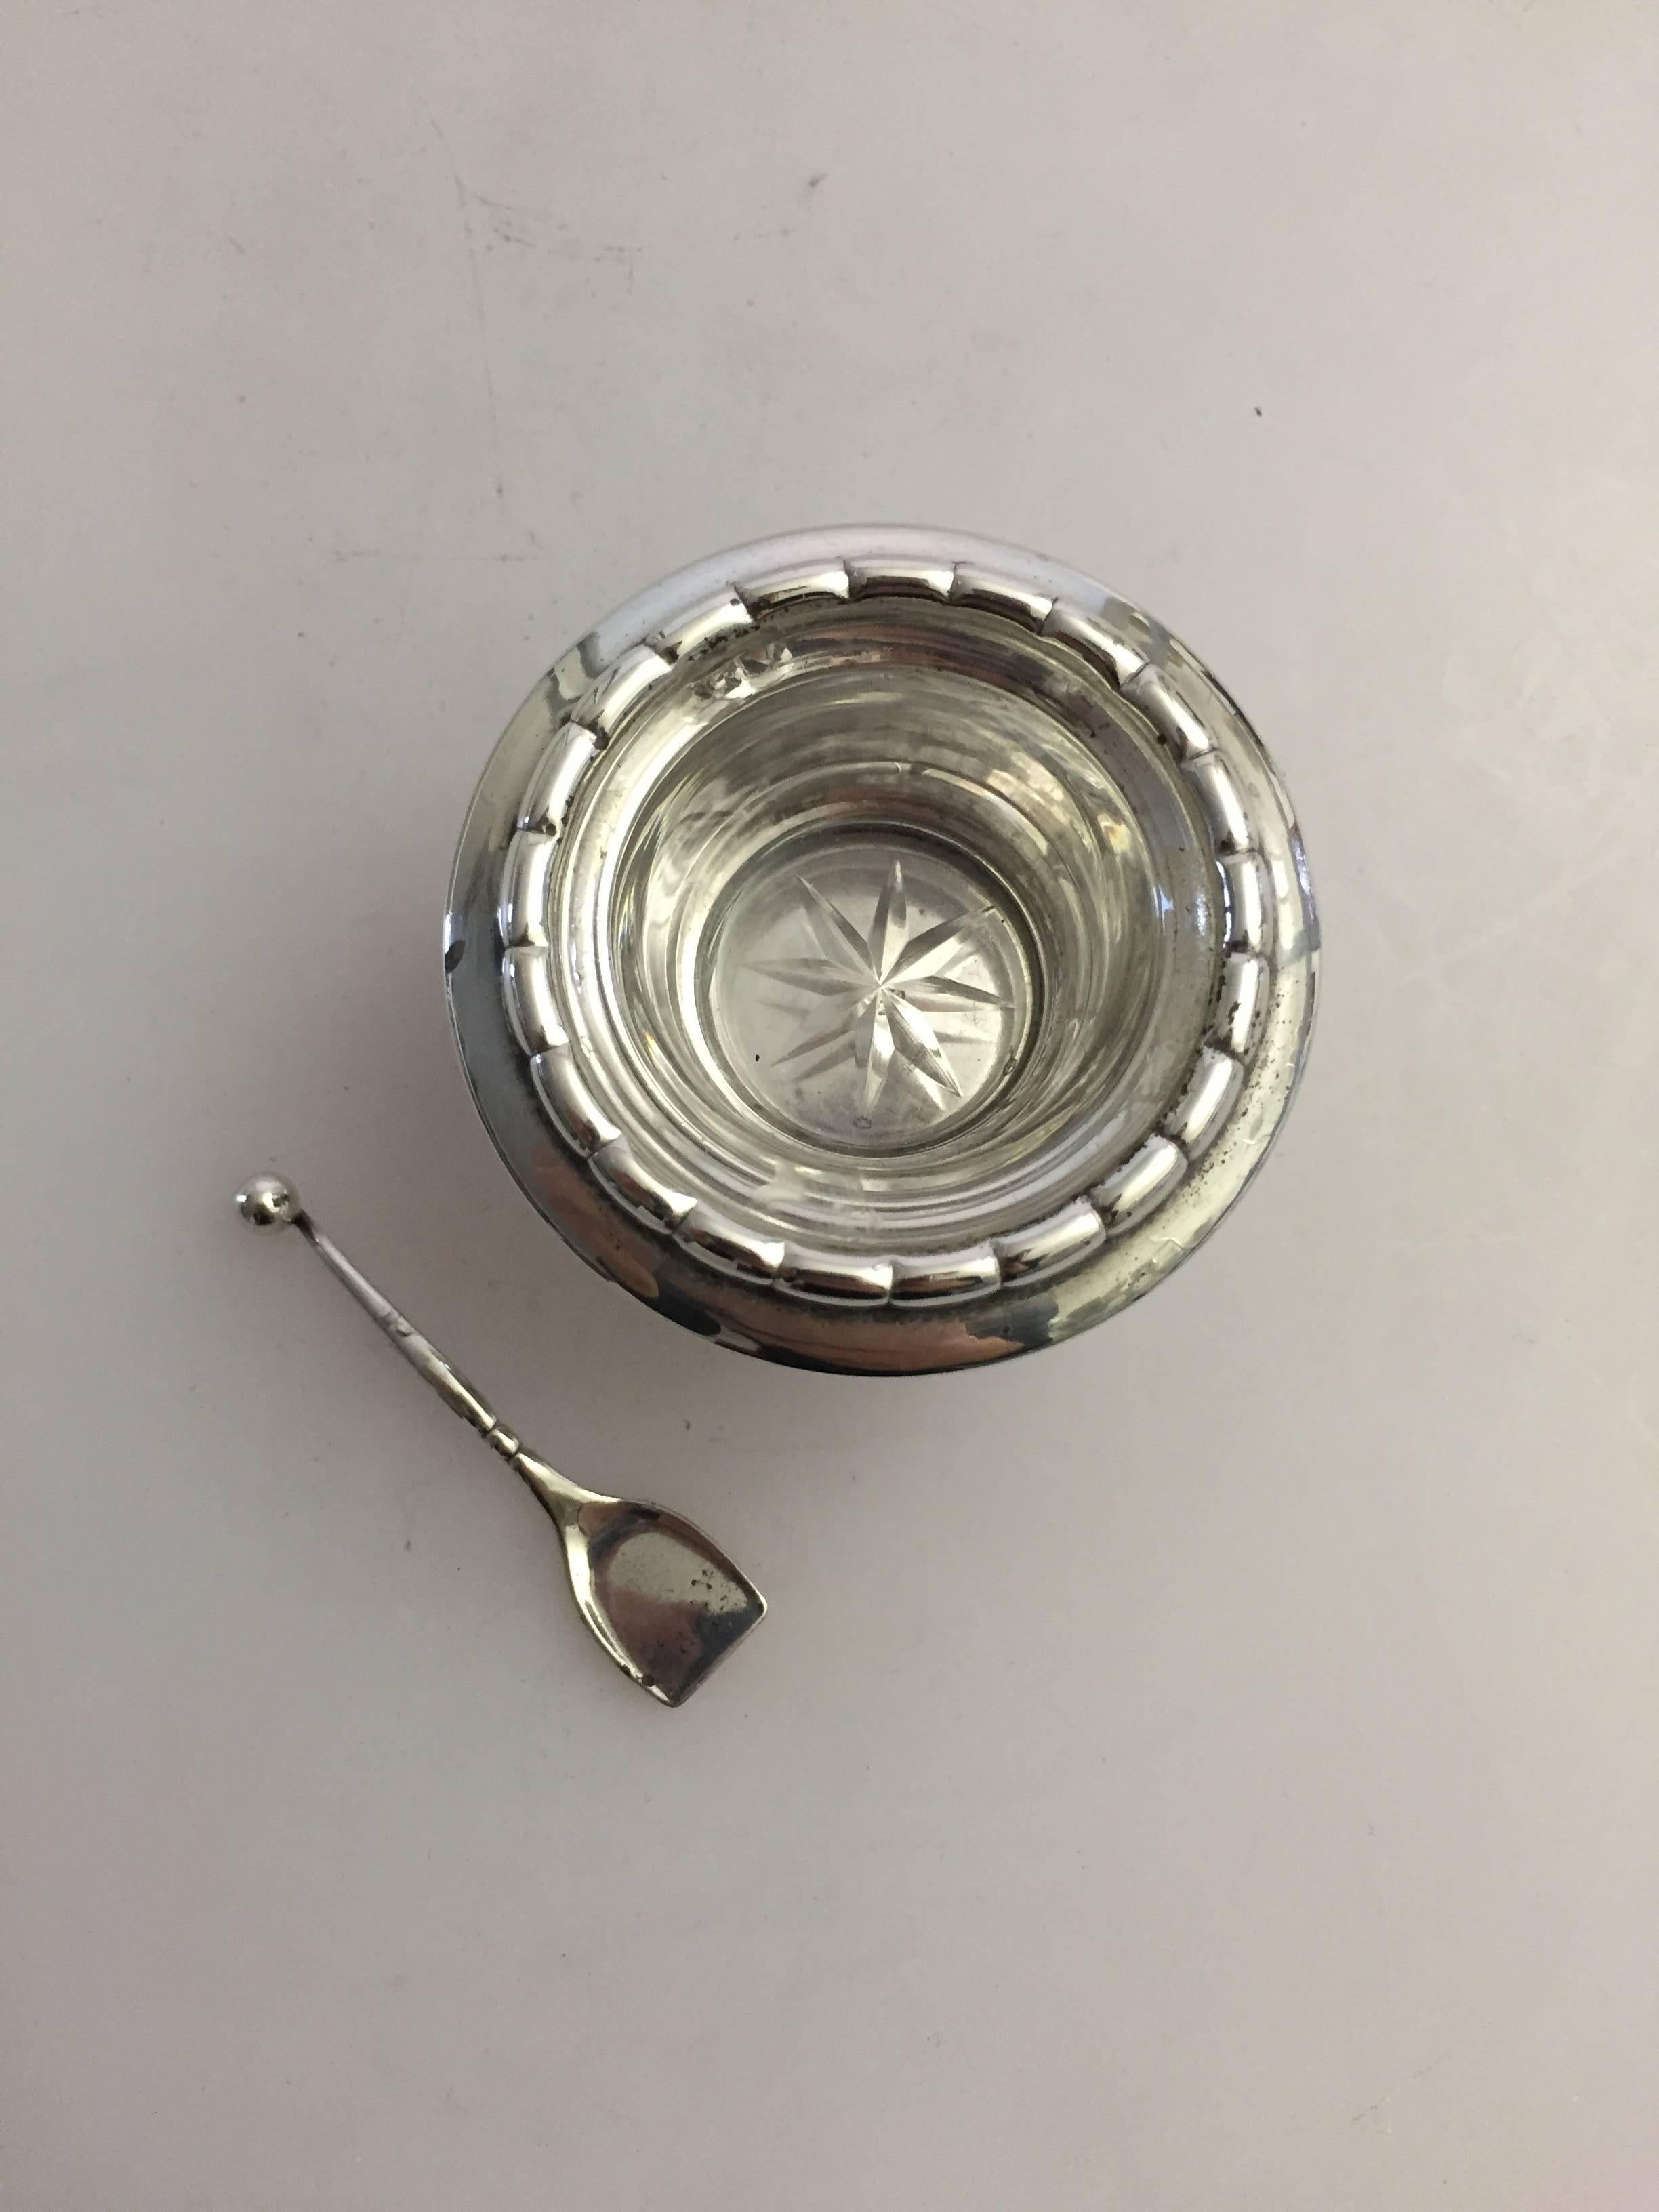 Georg Jensen sterling silver salt dish #236 and spoon #130. The salt dish comes with an original inserted glass cup. The glass have a few chips here and there but the dish can bed used with or without the glass. Made with marks from